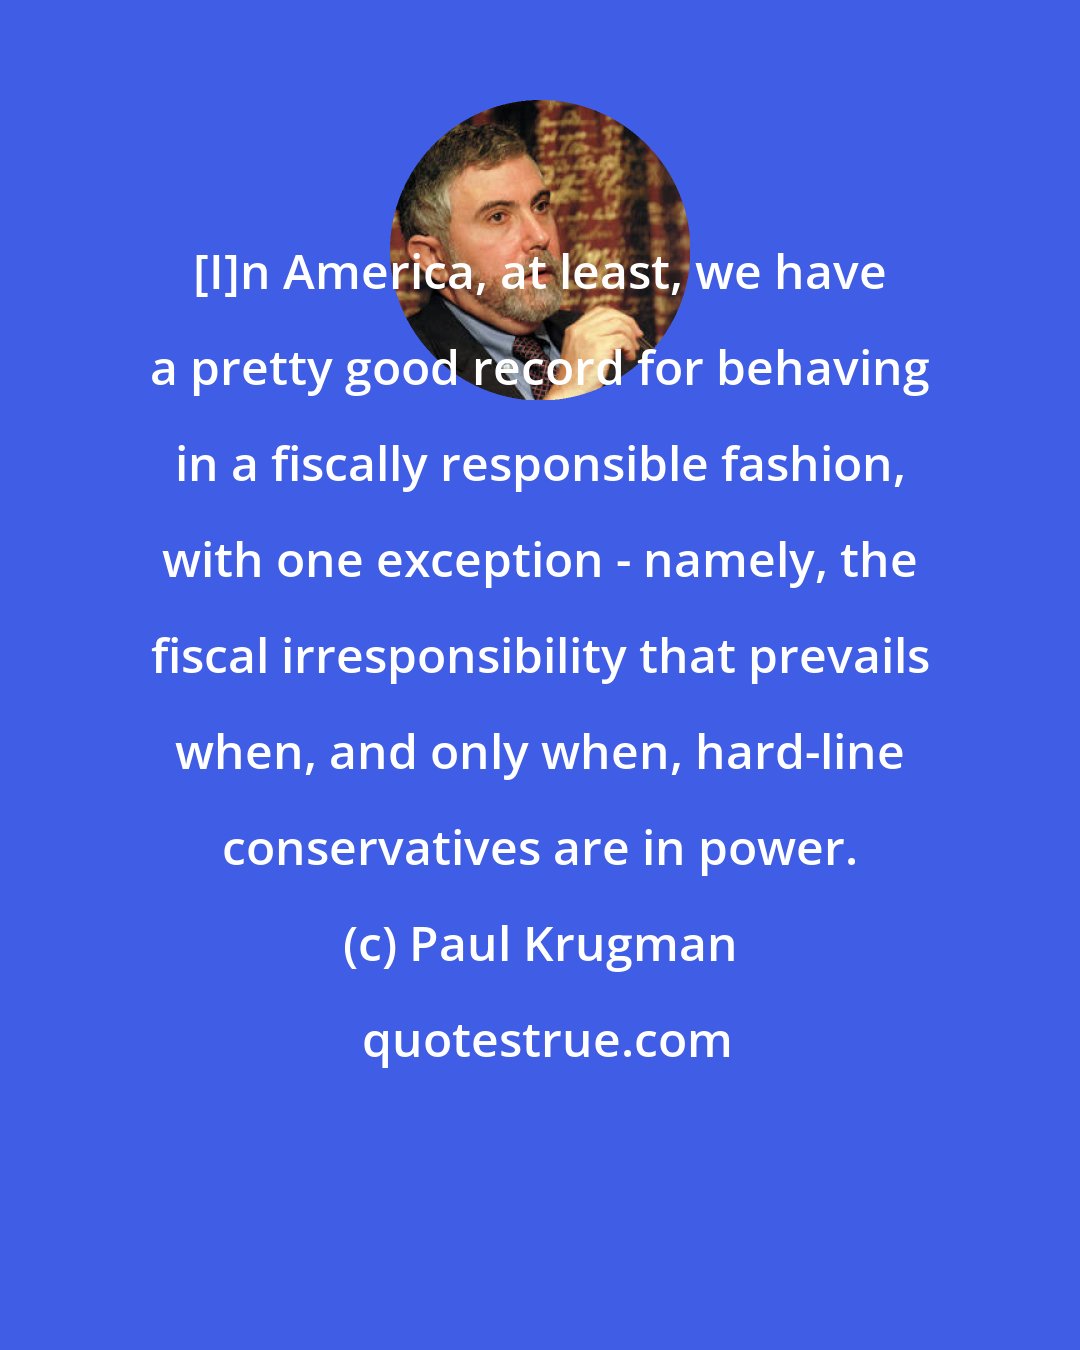 Paul Krugman: [I]n America, at least, we have a pretty good record for behaving in a fiscally responsible fashion, with one exception - namely, the fiscal irresponsibility that prevails when, and only when, hard-line conservatives are in power.